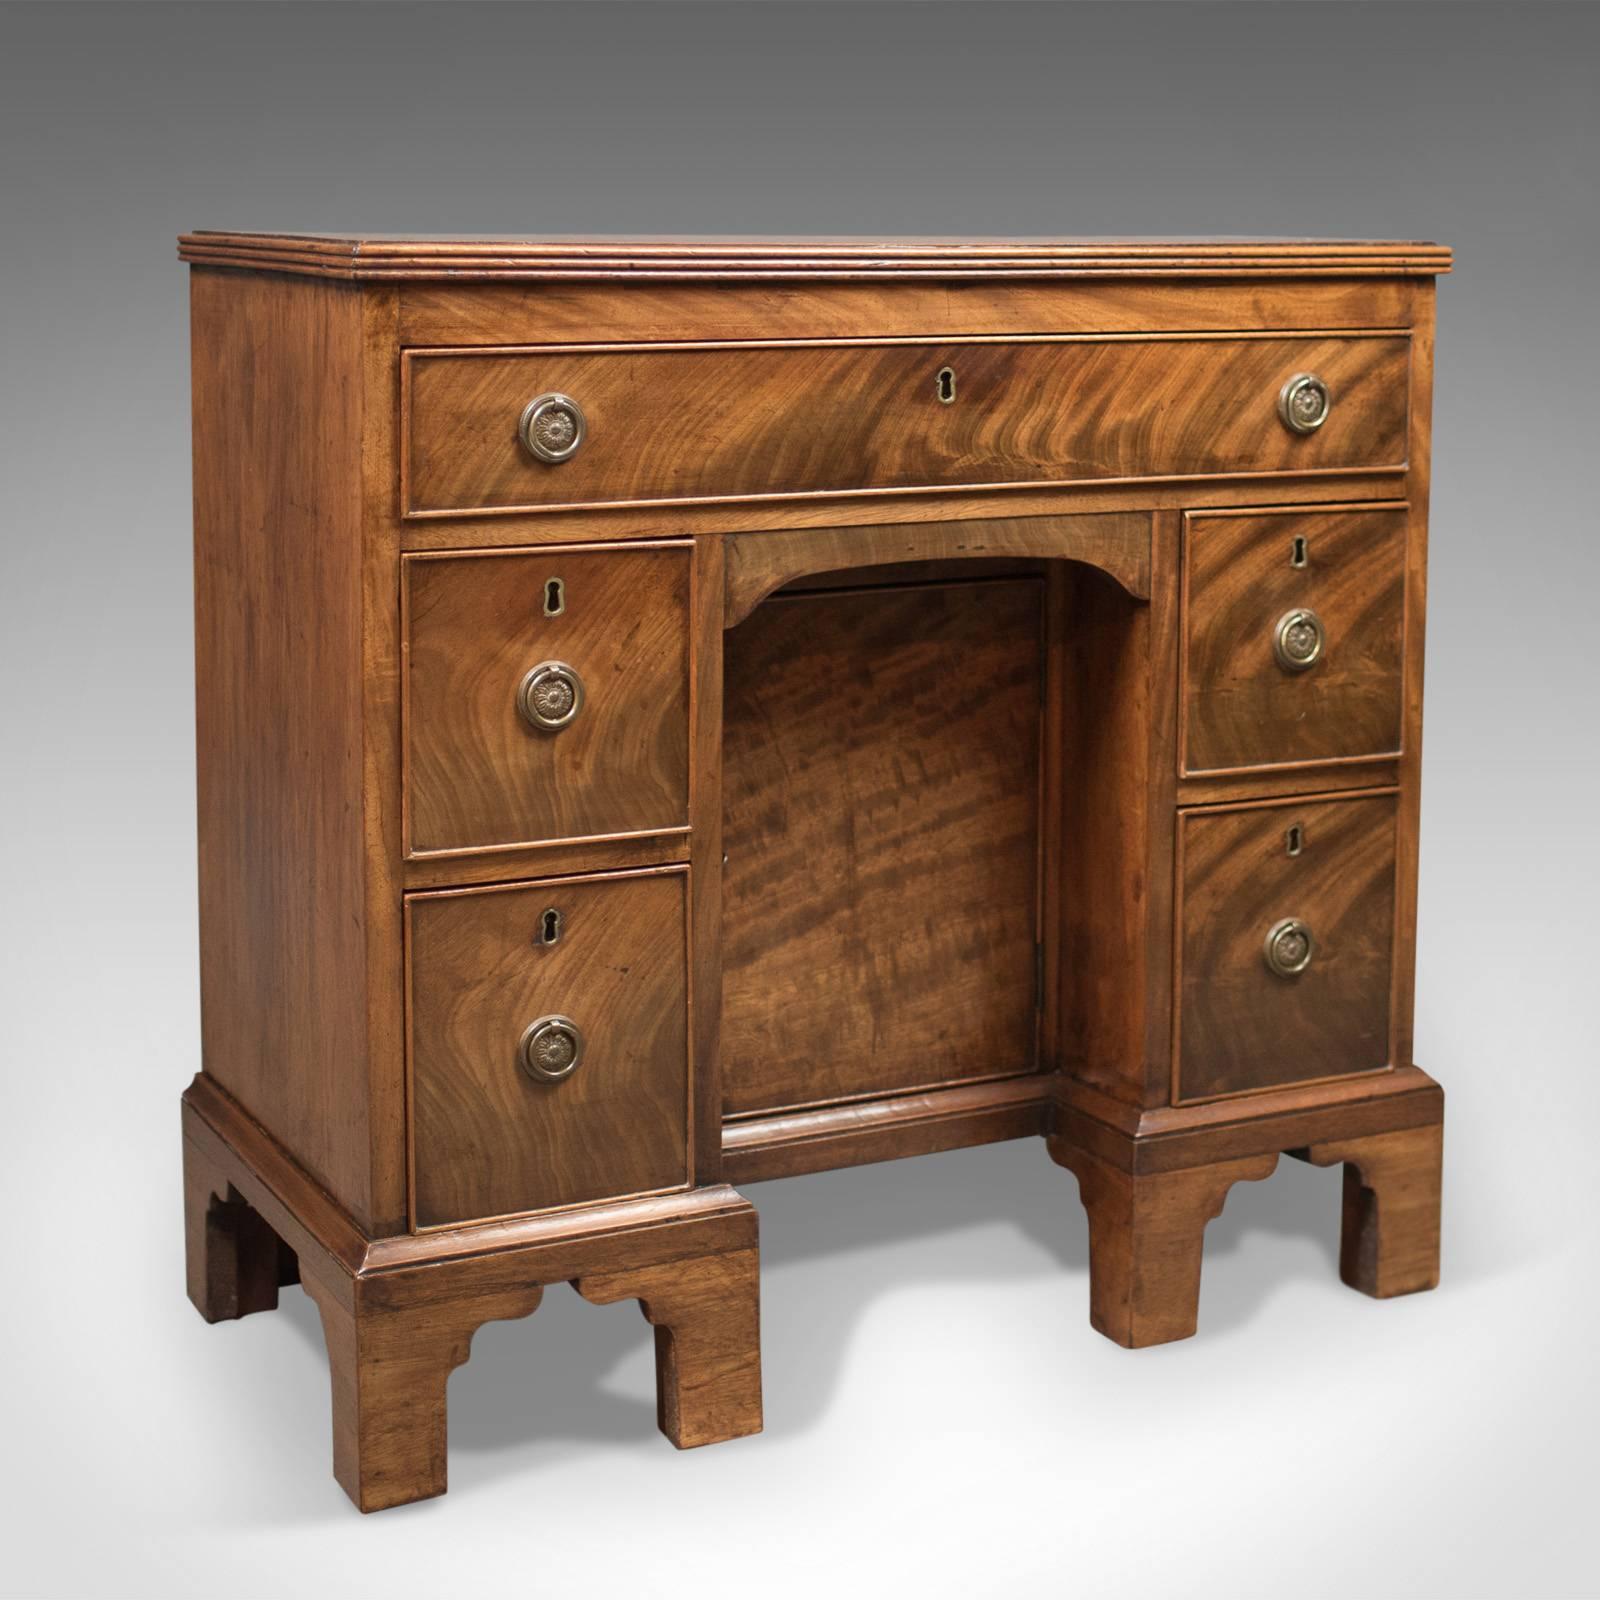 This is an antique kneehole desk, late 19th century, Victorian in the Georgian taste, circa 1870.

Crafted in quality flame mahogany with grain interest, good colour and an aged patina
Raised on Classic, Georgian inspired, bracket feet
Recessed